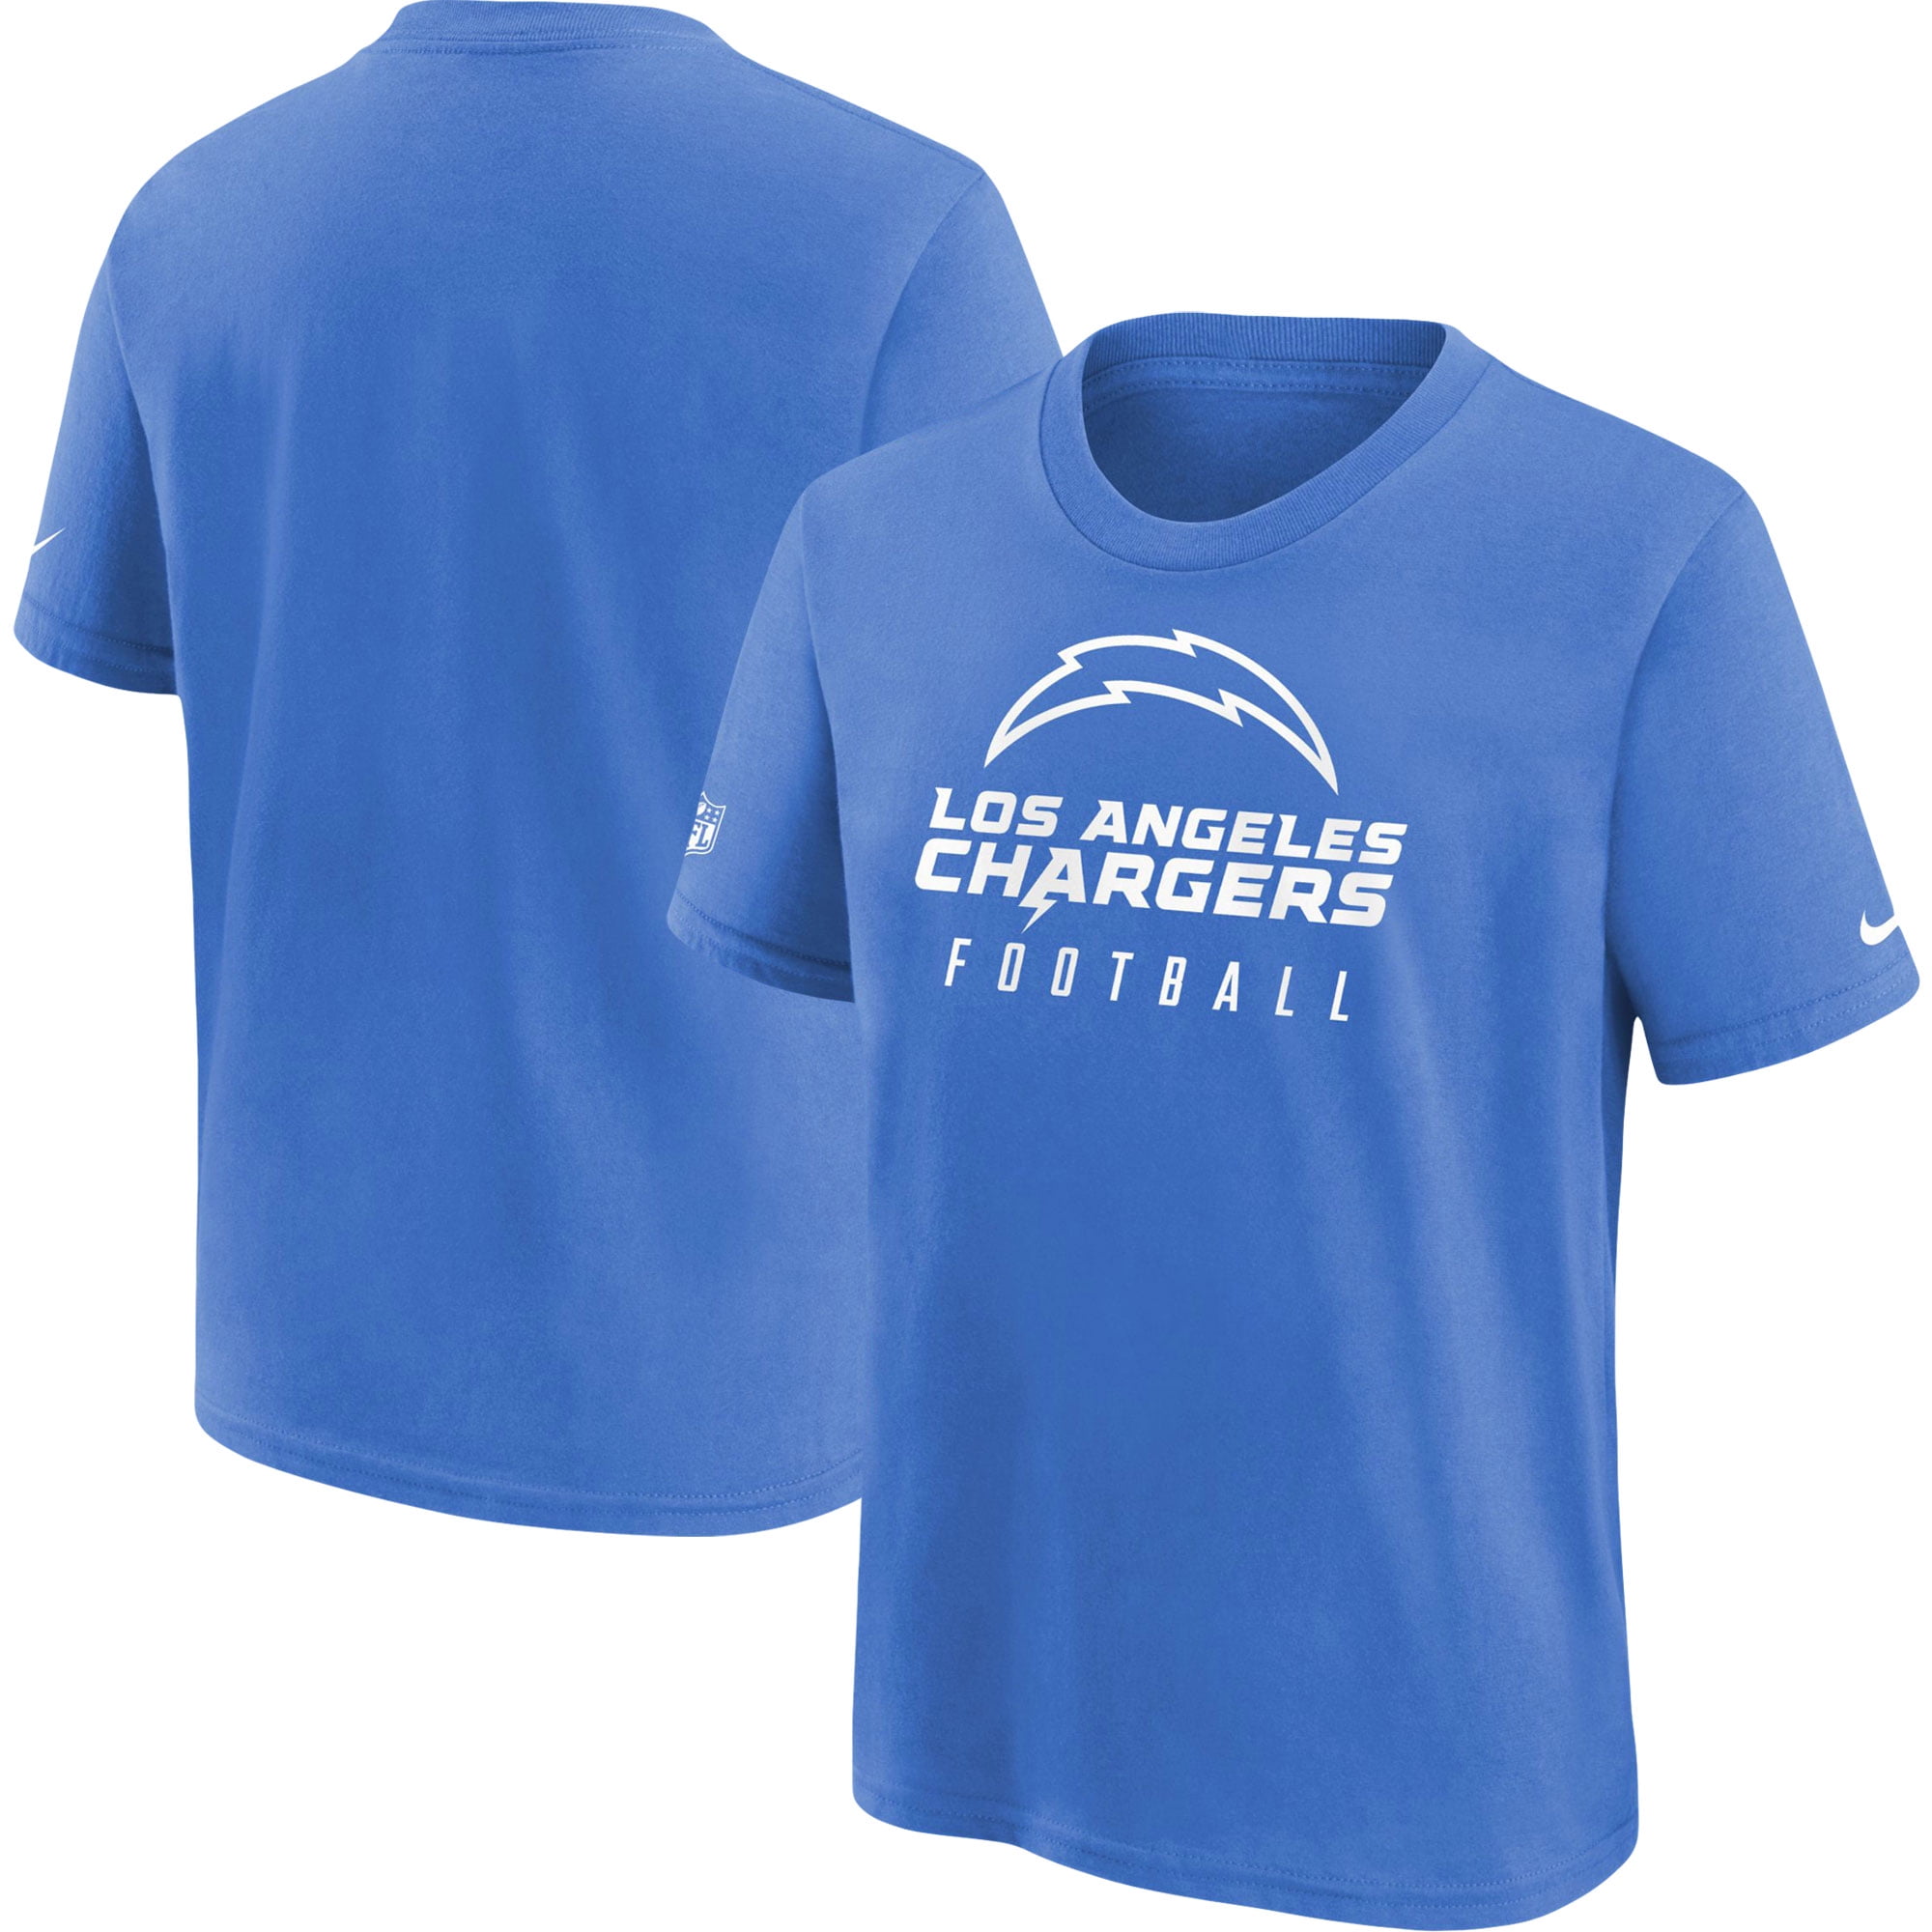 Youth Nike Powder Blue Los Angeles Chargers Sideline Legend Performance ...